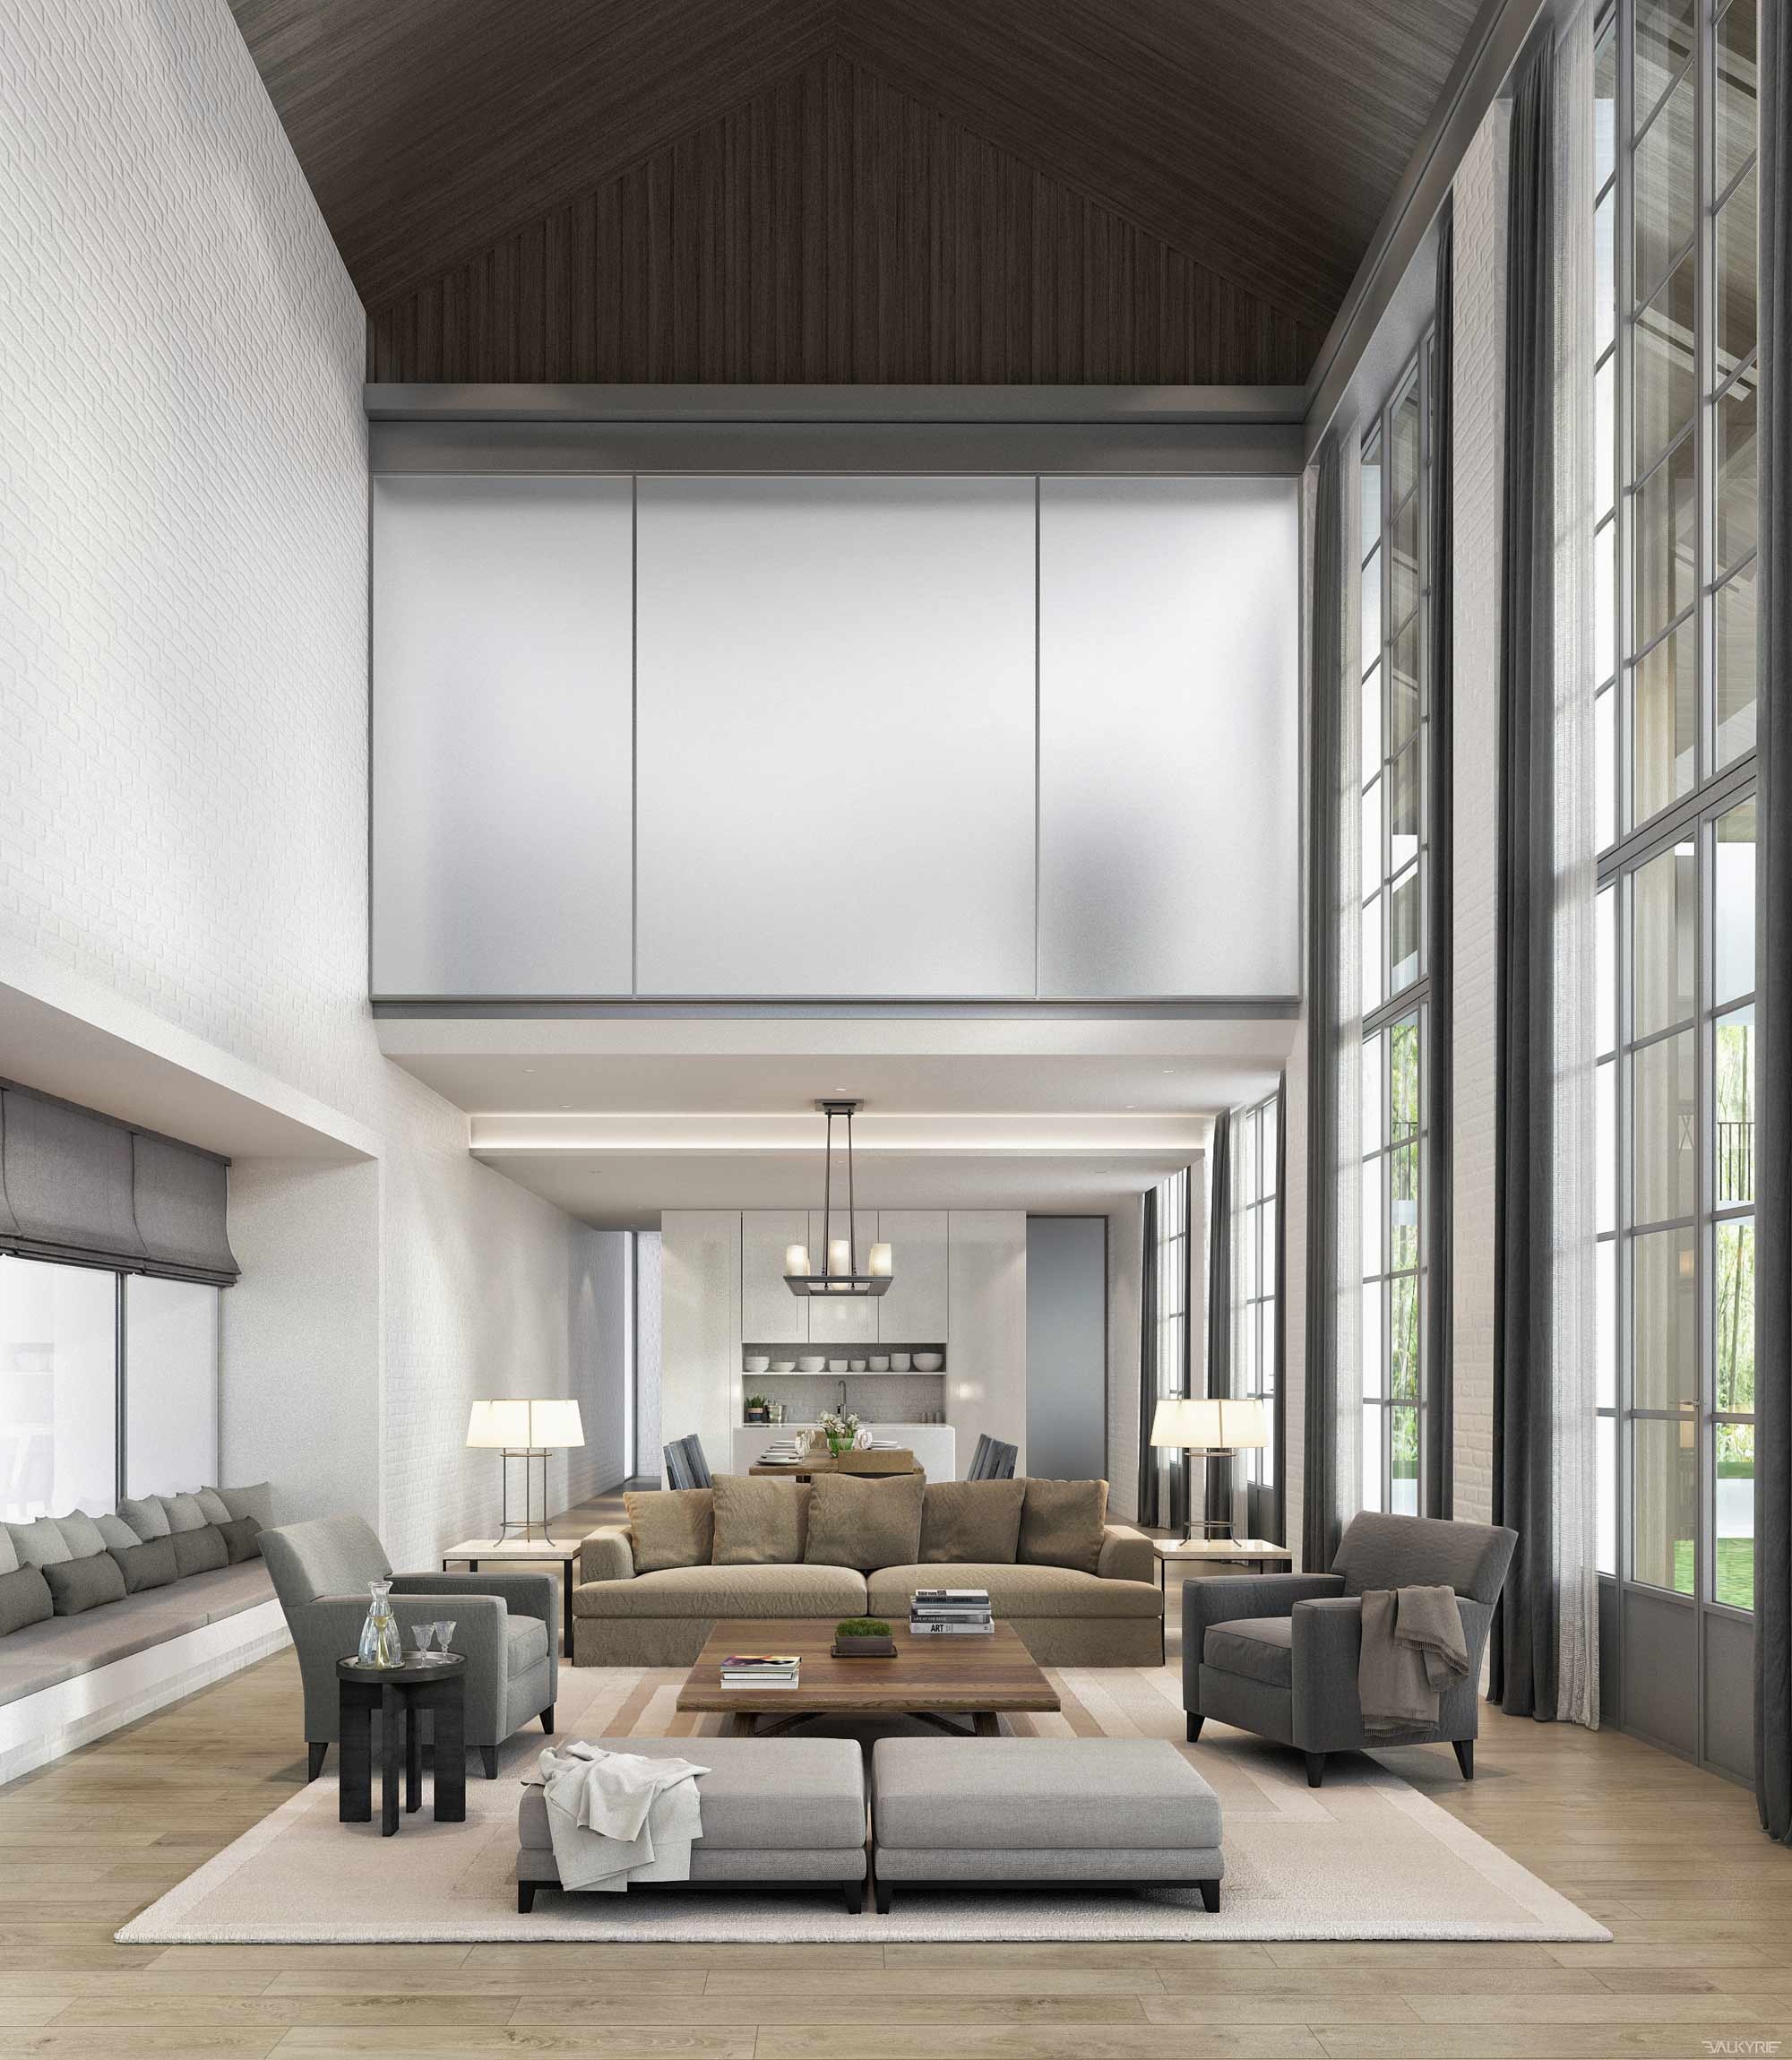 Design ideas for luxury living rooms "width =" 2000 "height =" 2299 "srcset =" https://mileray.com/wp-content/uploads/2020/05/1588517195_941_Decorating-Living-Room-Design-Ideas-With-An-Eclectic-Decor-Looks.jpeg 2000w, https: // myfashionos. com / wp-content / uploads / 2016/08 / Valkyrie-Studio1-261x300.jpeg 261w, https://mileray.com/wp-content/uploads/2016/08/Valkyrie-Studio1-768x883.jpeg 768w, https: //mileray.com/wp-content/uploads/2016/08/Valkyrie-Studio1-891x1024.jpeg 891w, https://mileray.com/wp-content/uploads/2016/08/Valkyrie-Studio1-696x800.jpeg 696w, https://mileray.com/wp-content/uploads/2016/08/Valkyrie-Studio1-1068x1228.jpeg 1068w, https://mileray.com/wp-content/uploads/2016/08/Valkyrie-Studio1 -365x420.jpeg 365w "sizes =" (maximum width: 2000px) 100vw, 2000px